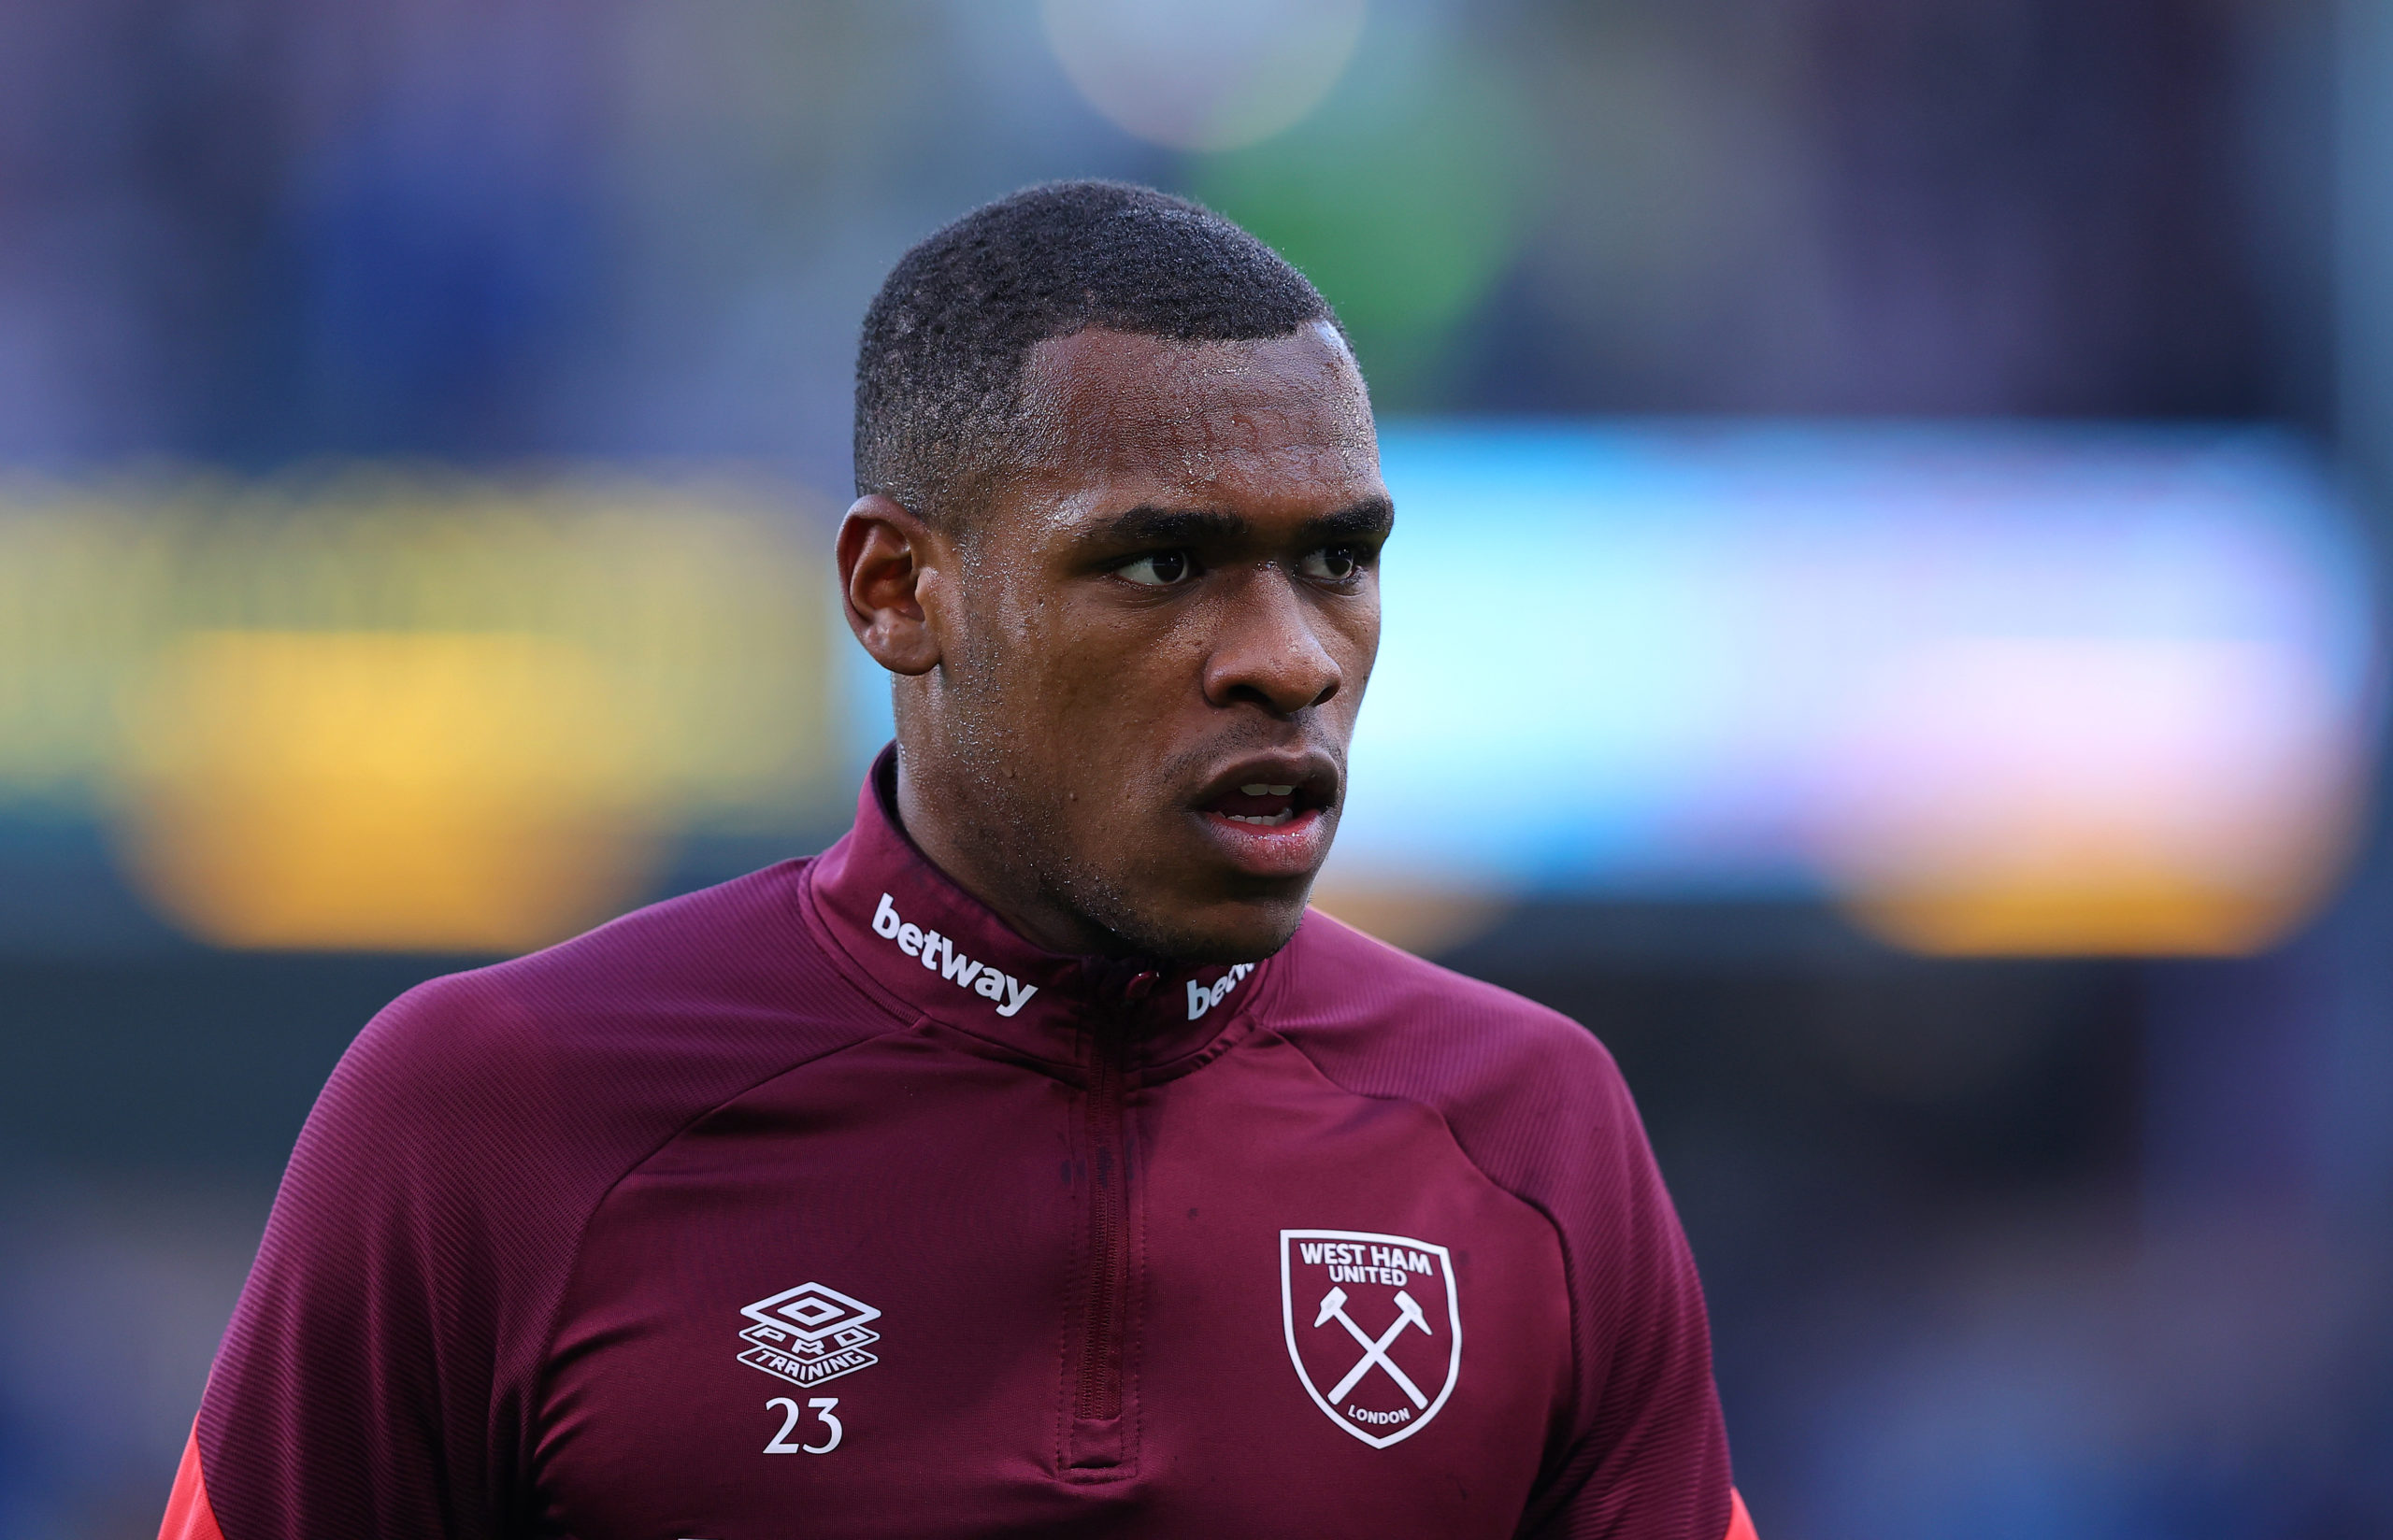 Issa Diop and David Moyes at odds over West Ham transfer stance as Milan make move - report